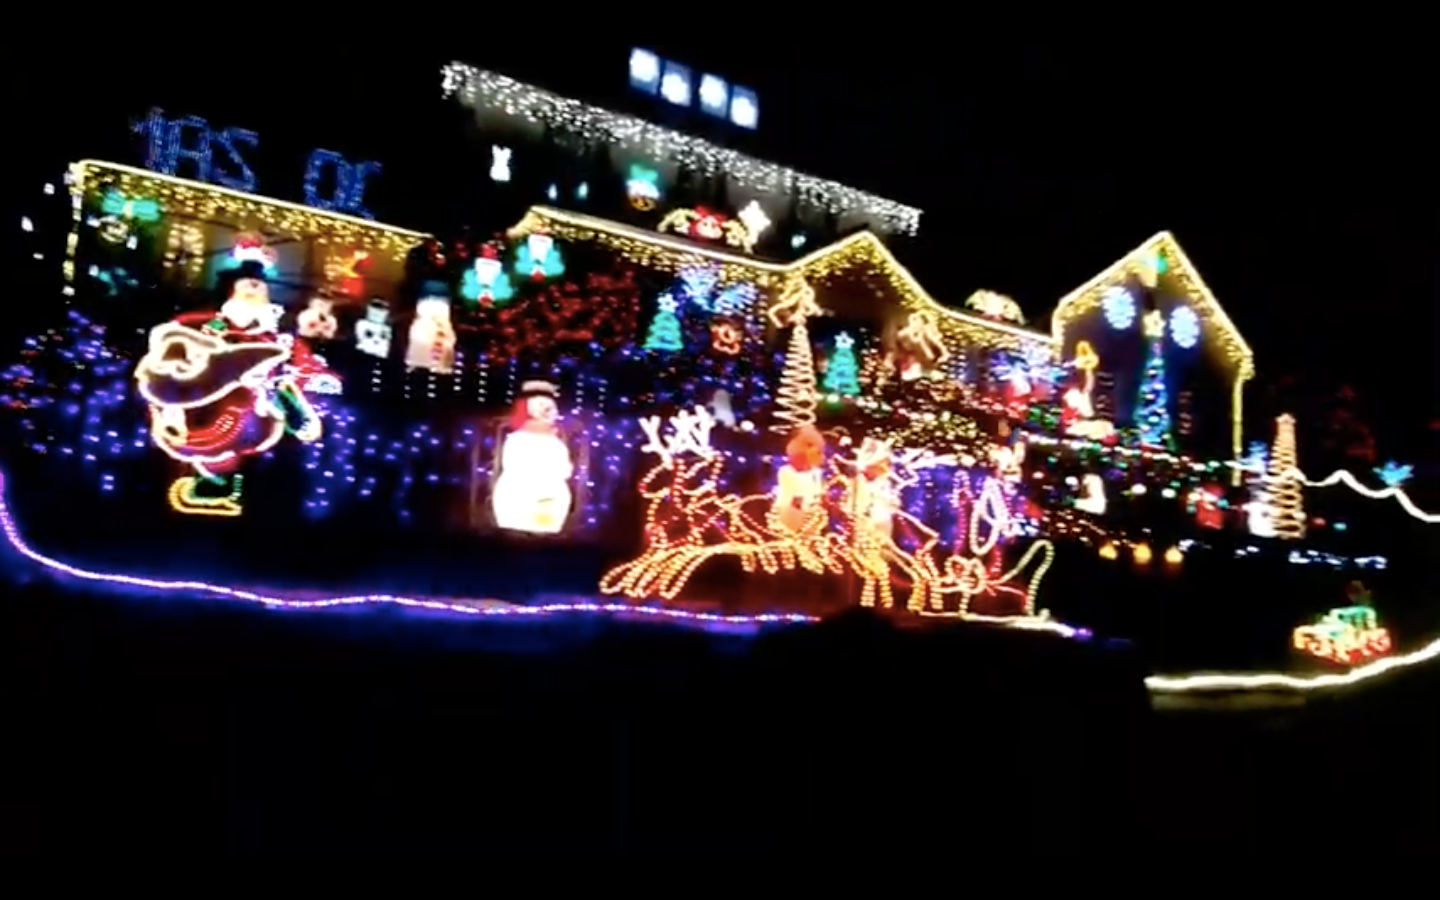 Couple put up more than 150,000 lights requiring 16,000 watts to power